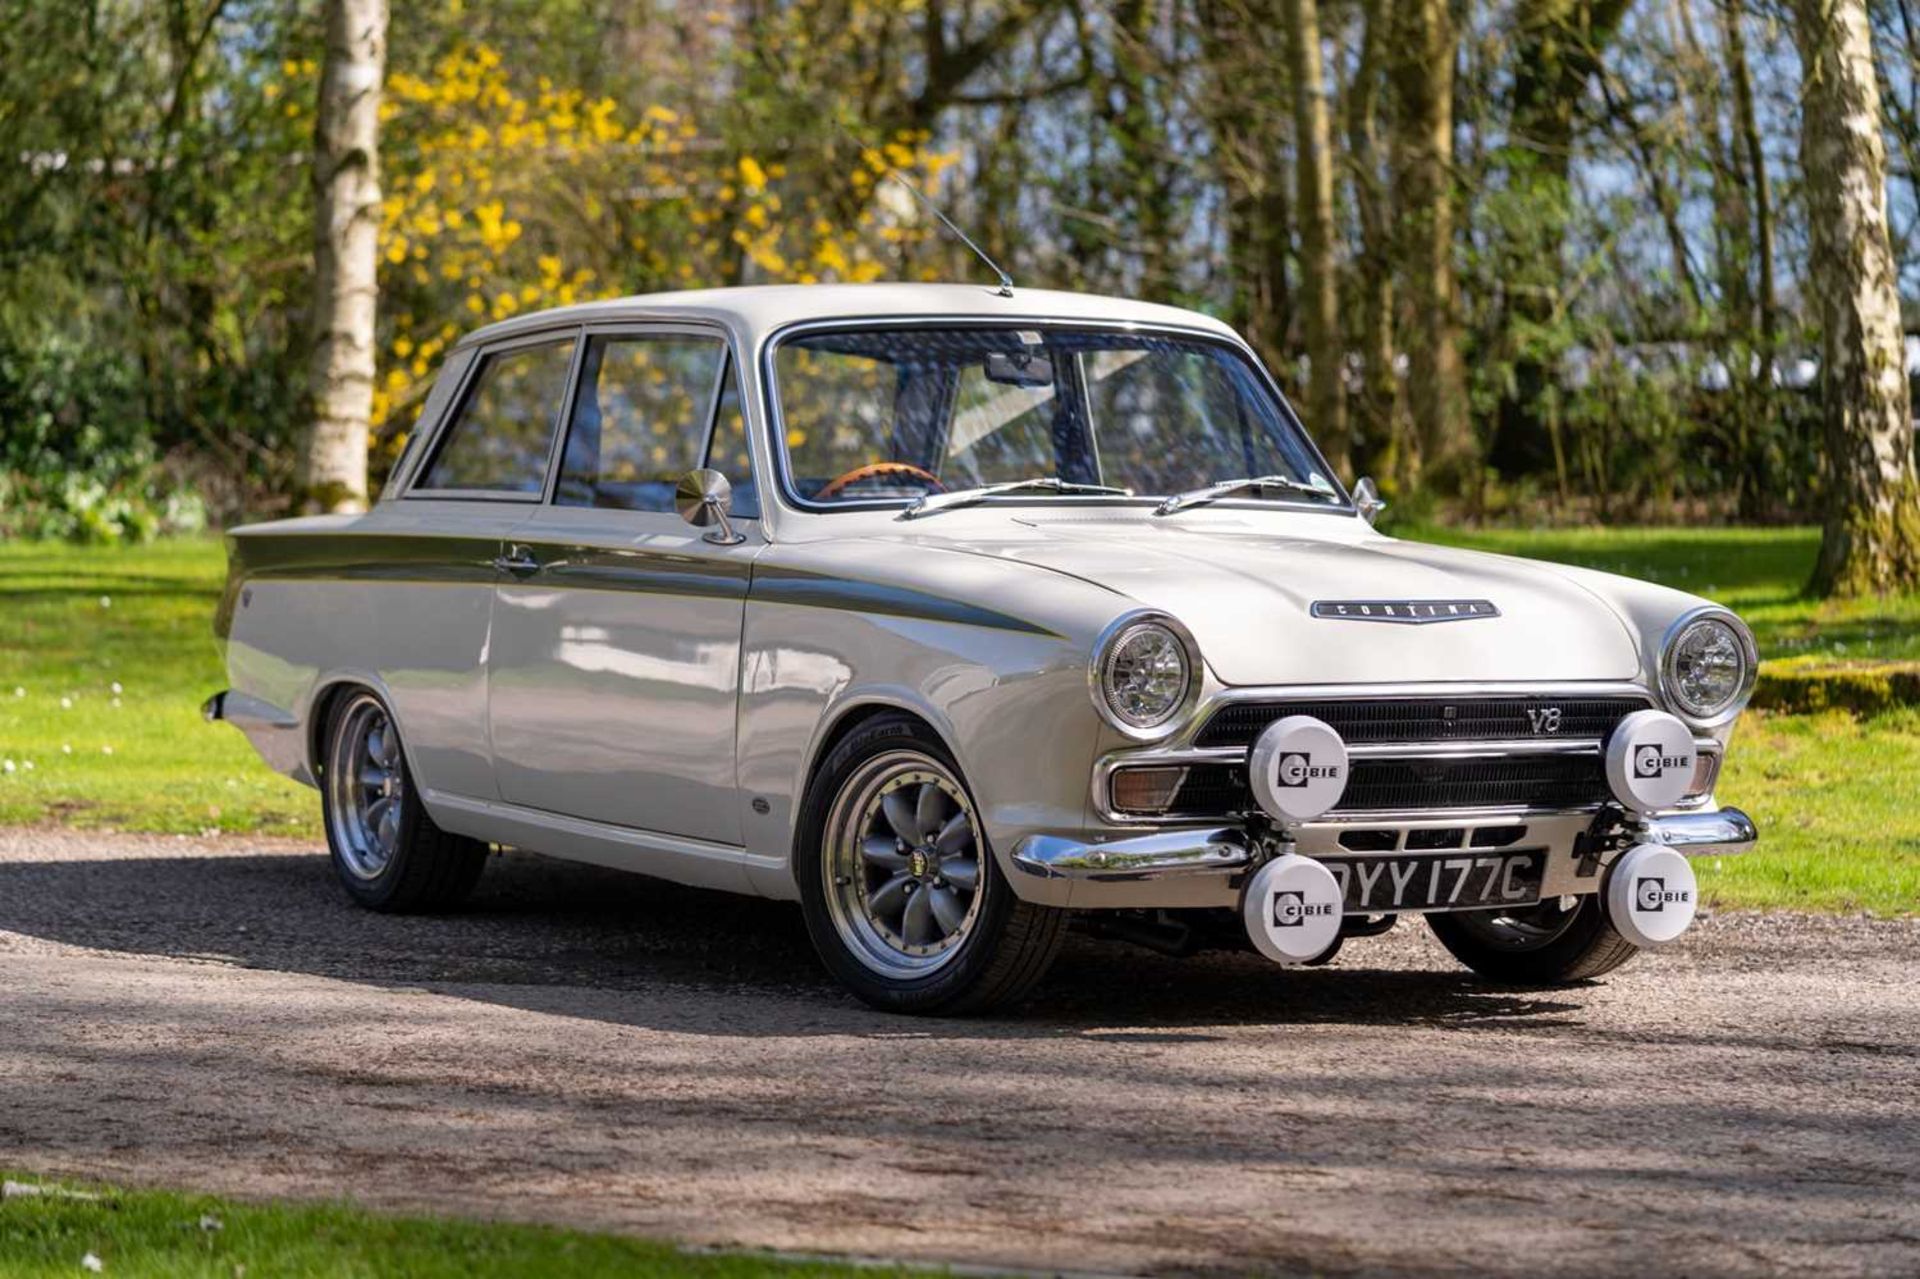 1965 Ford Cortina Super V8 Just 928 miles travelled since the completion 